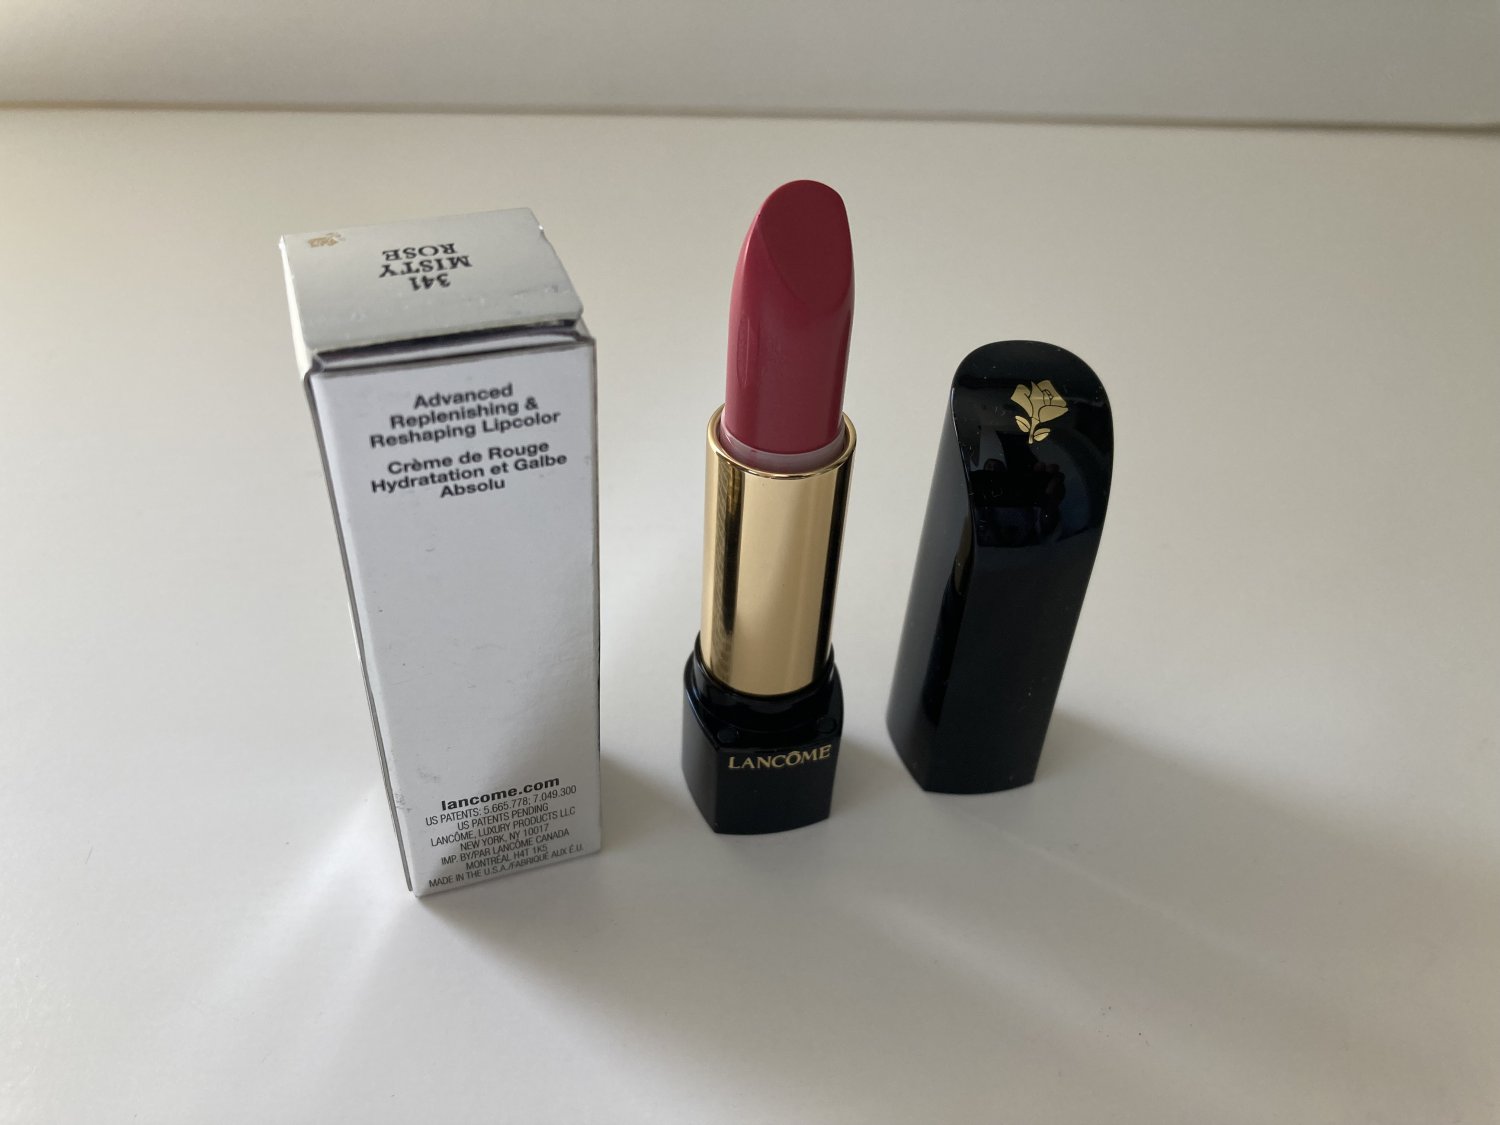 Lancome Absolute Rouge Advanced Replenishing & Reshaping Lipcolor - 341 Misty Rose